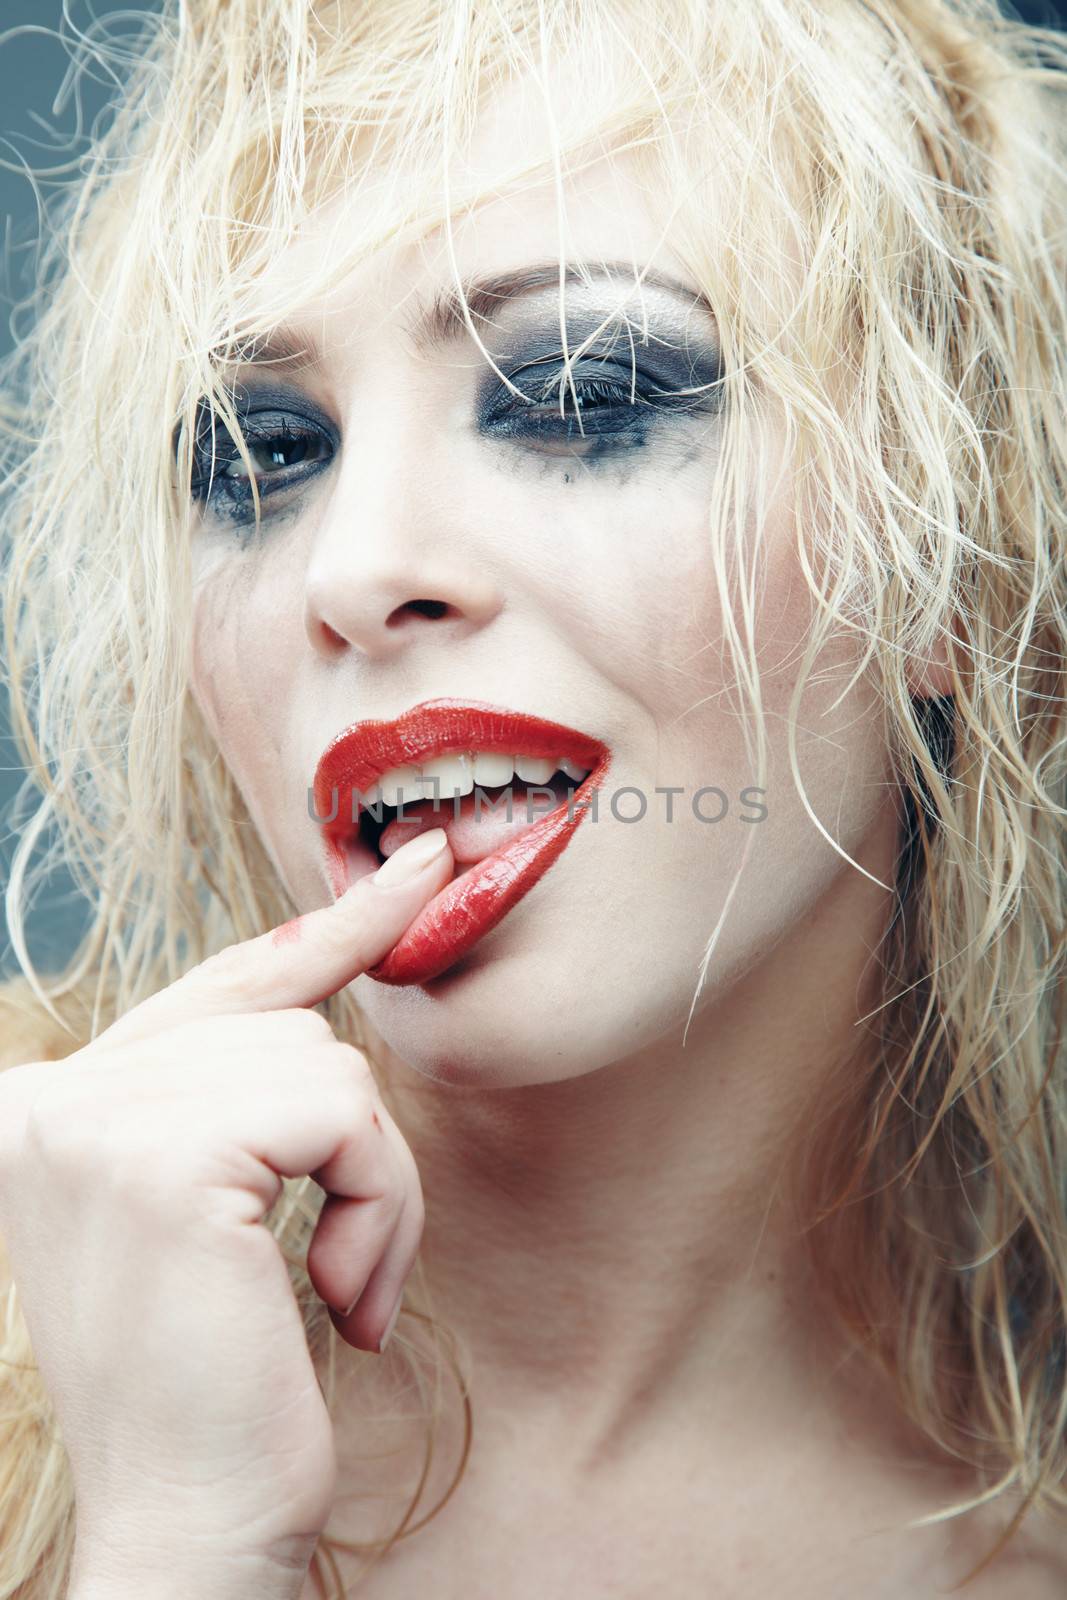 Young blond lady with bizarre makeup. Vertical studio photo. Artistic colors added